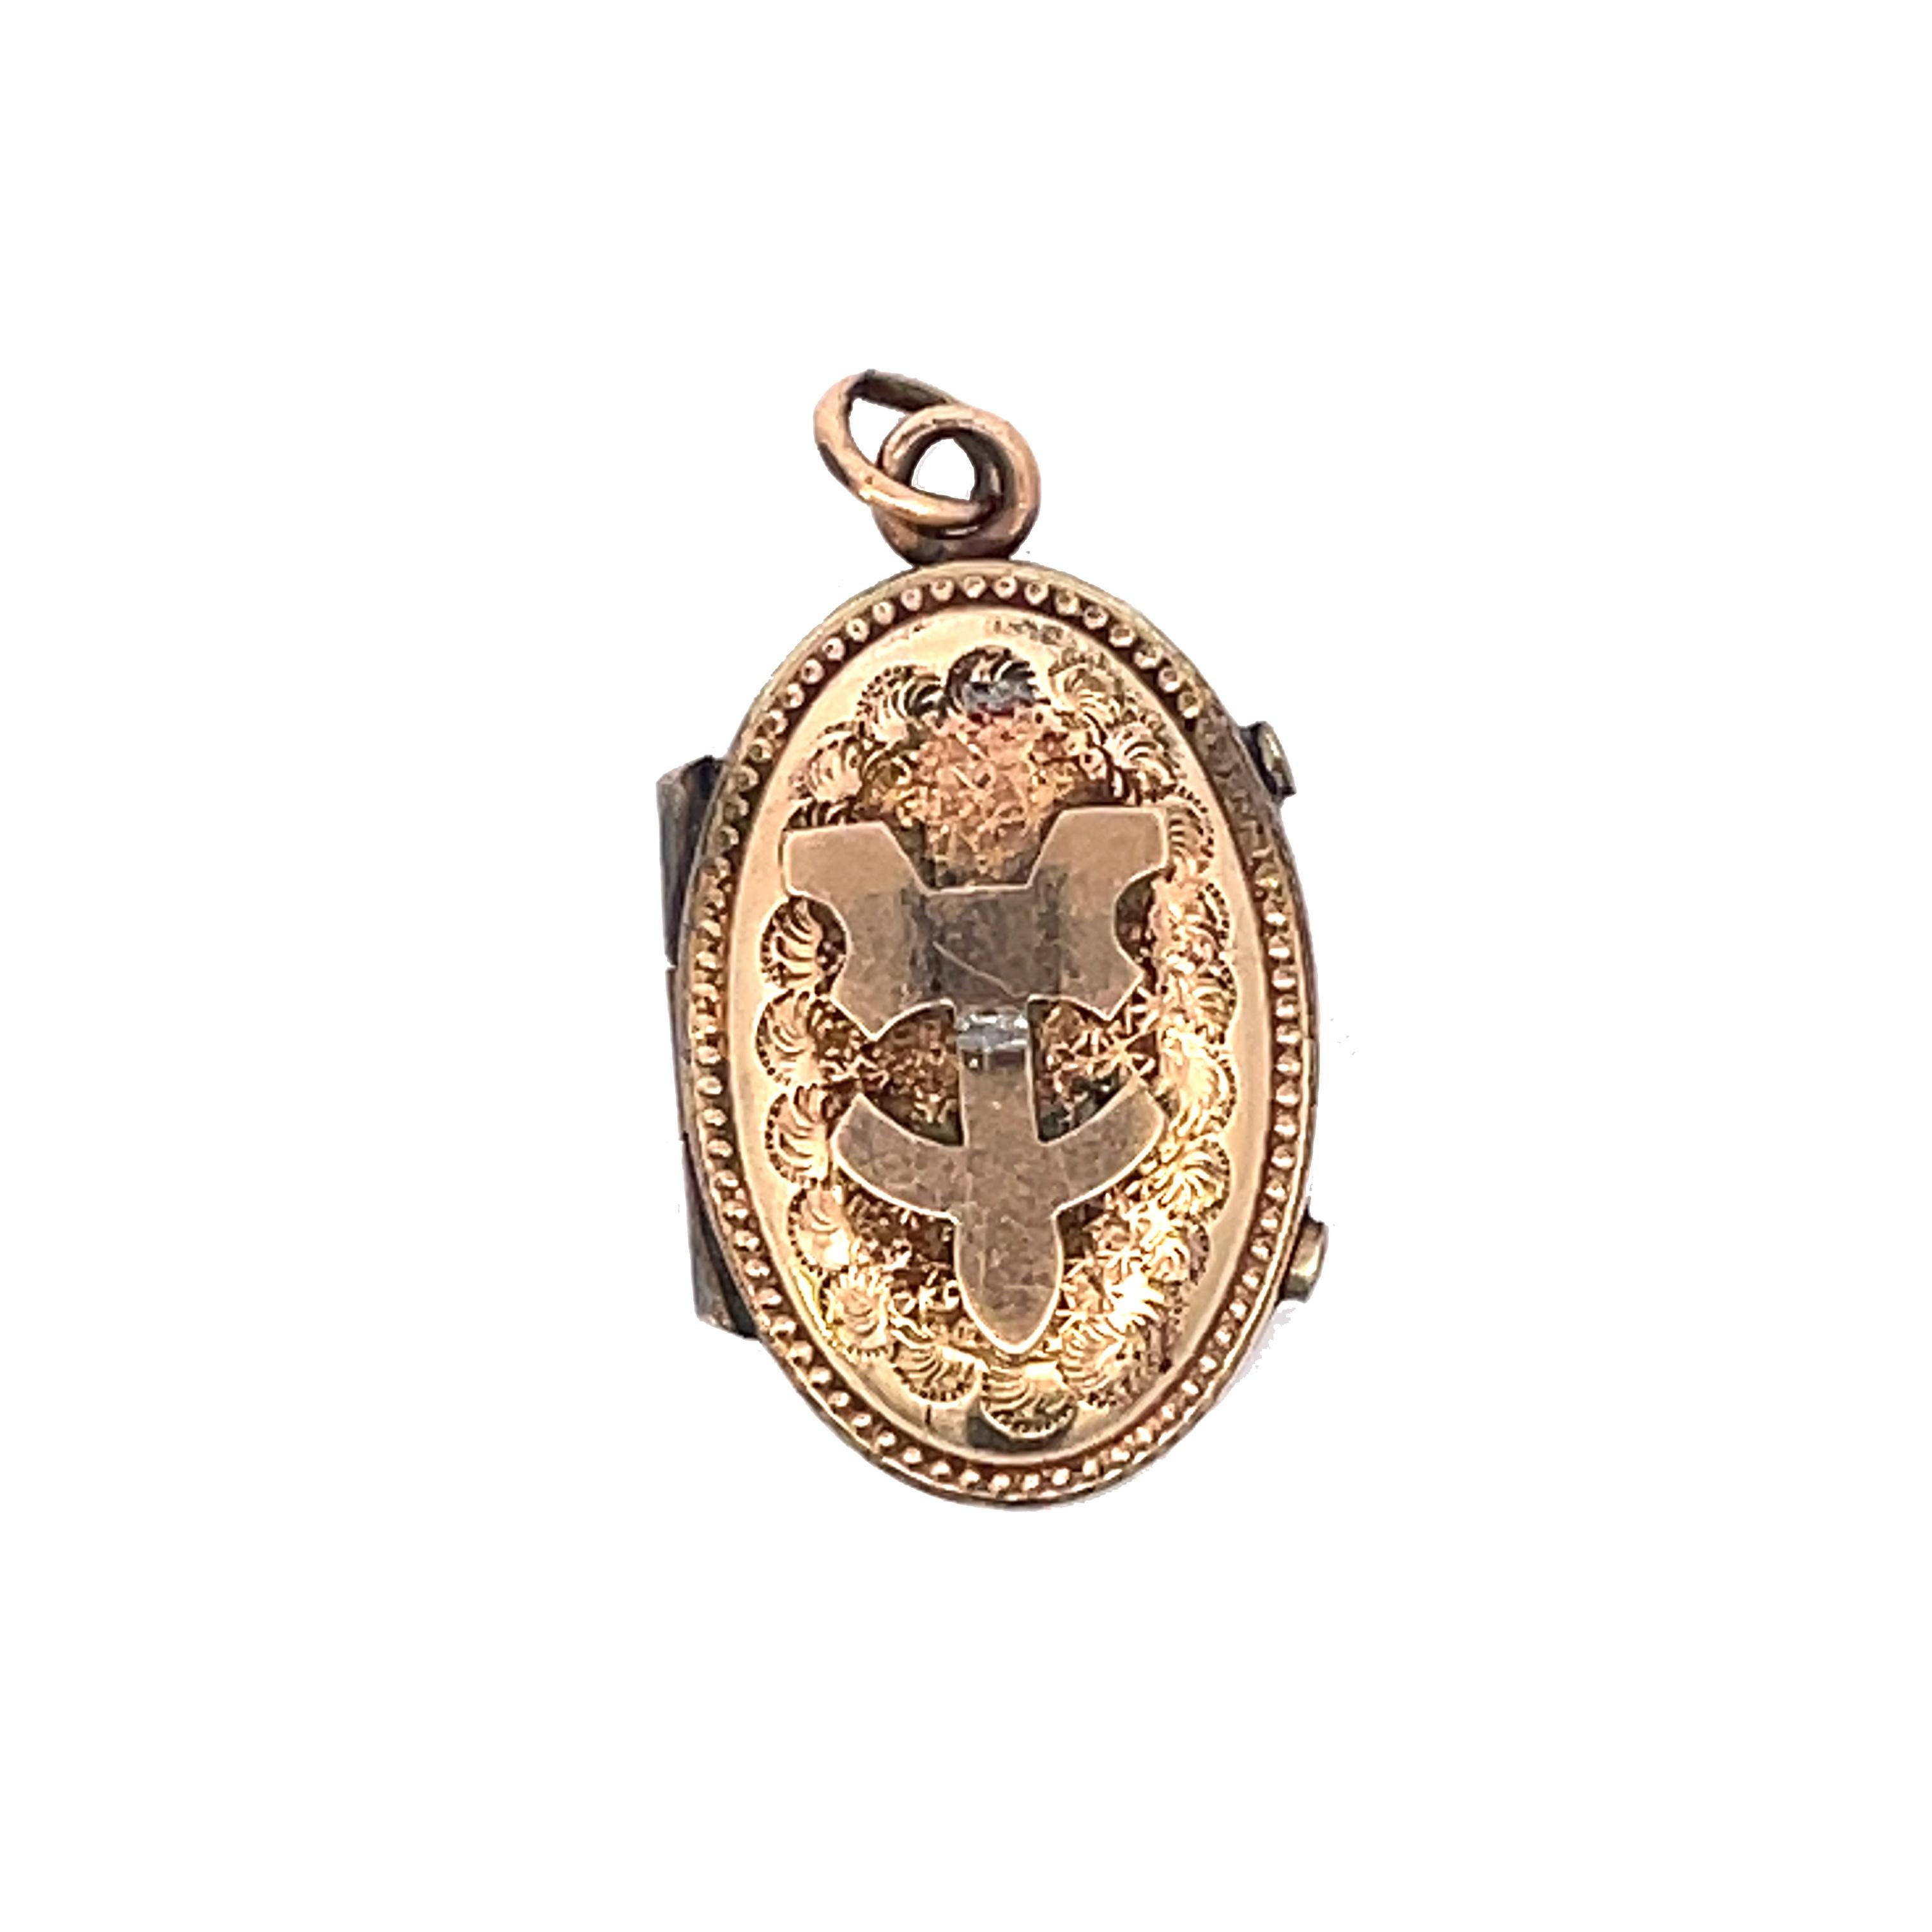 This is a splendid gold-filled locket from the Etruscan period that showcases intriguing and detailed engraving on both sides. Dainty and petite, the front of the locket has a beautiful engraved and textured surface with an intriguing decorative